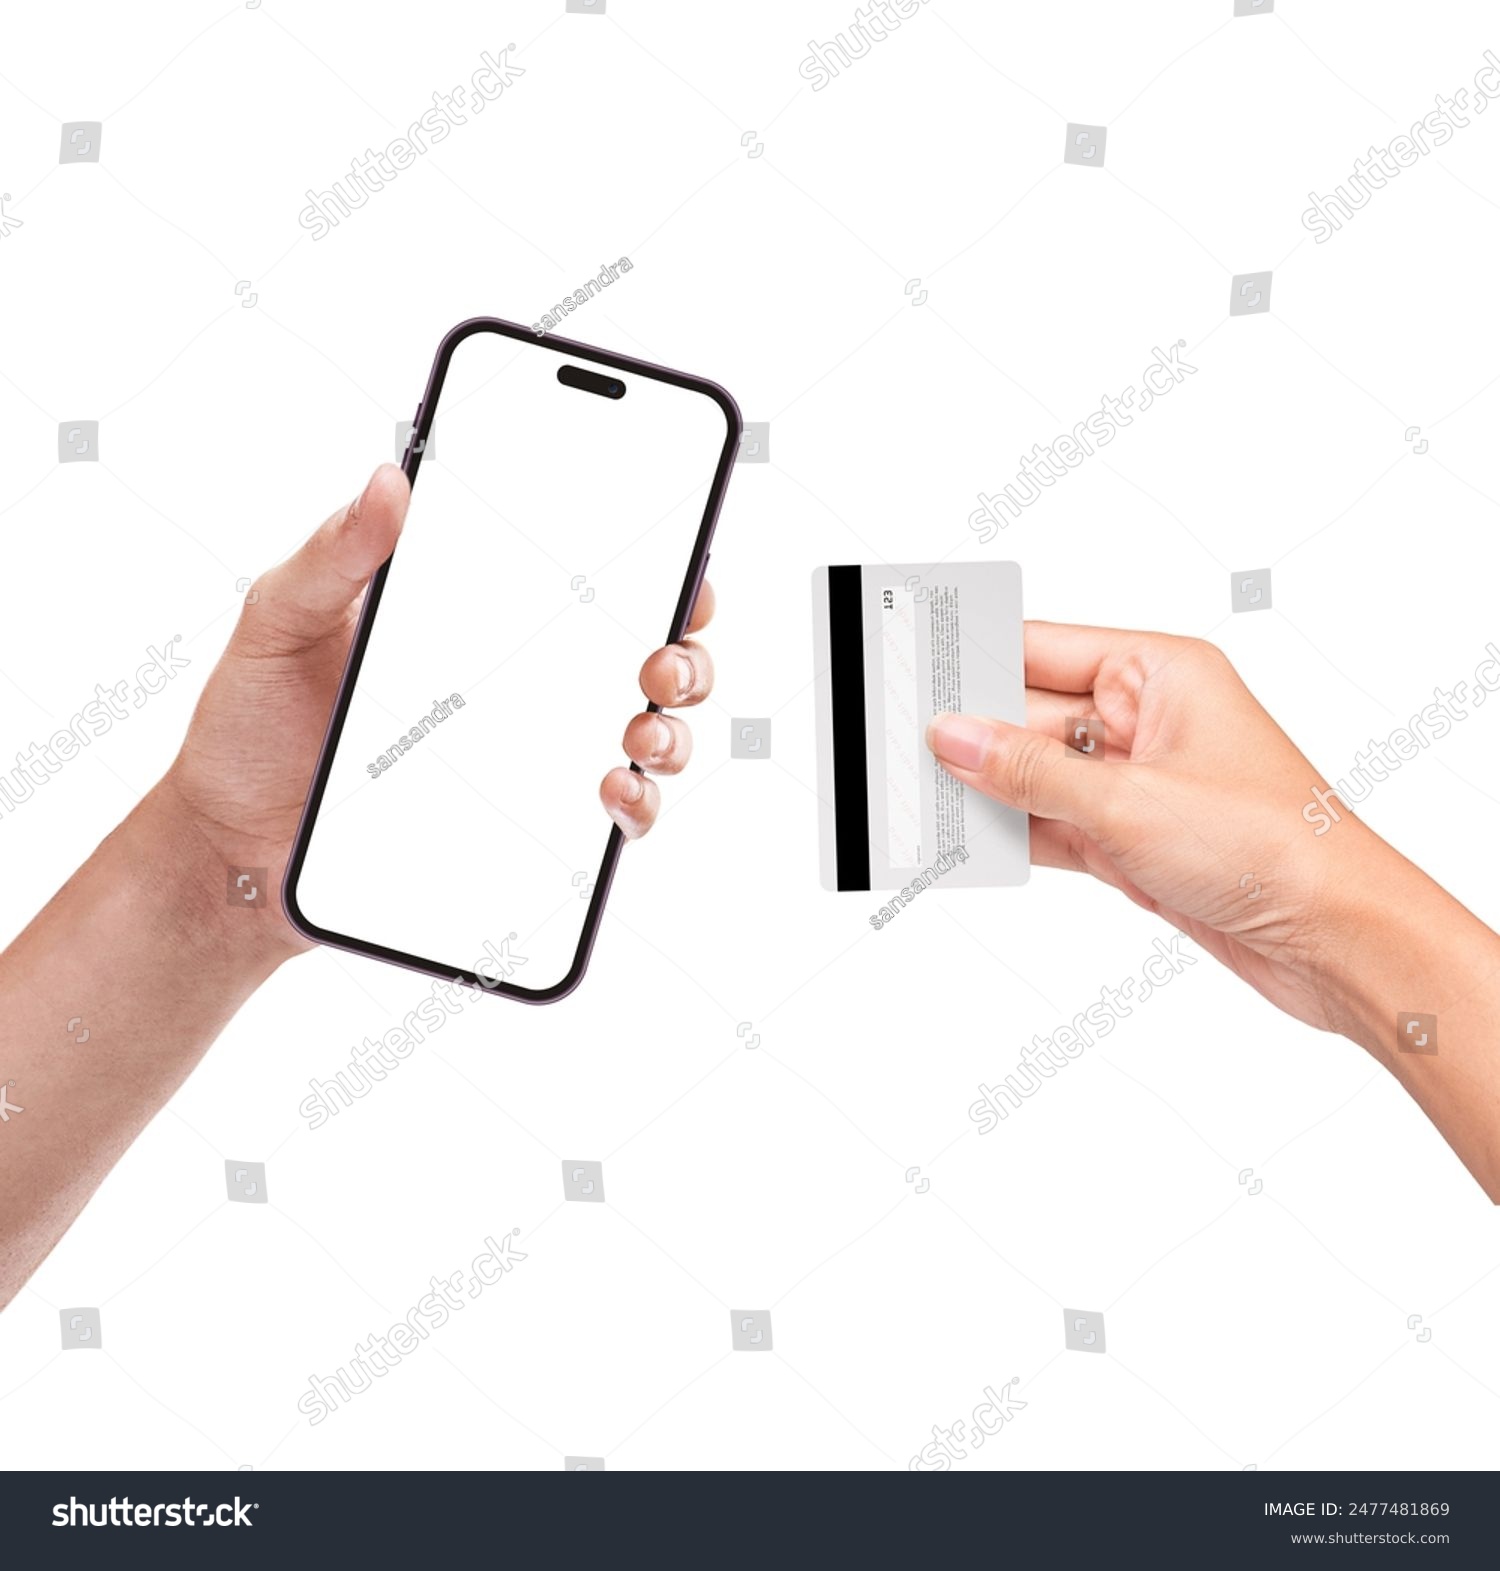 Hands holding phone with mobile wallet and holding credit card for online shopping payment, isolated on white background